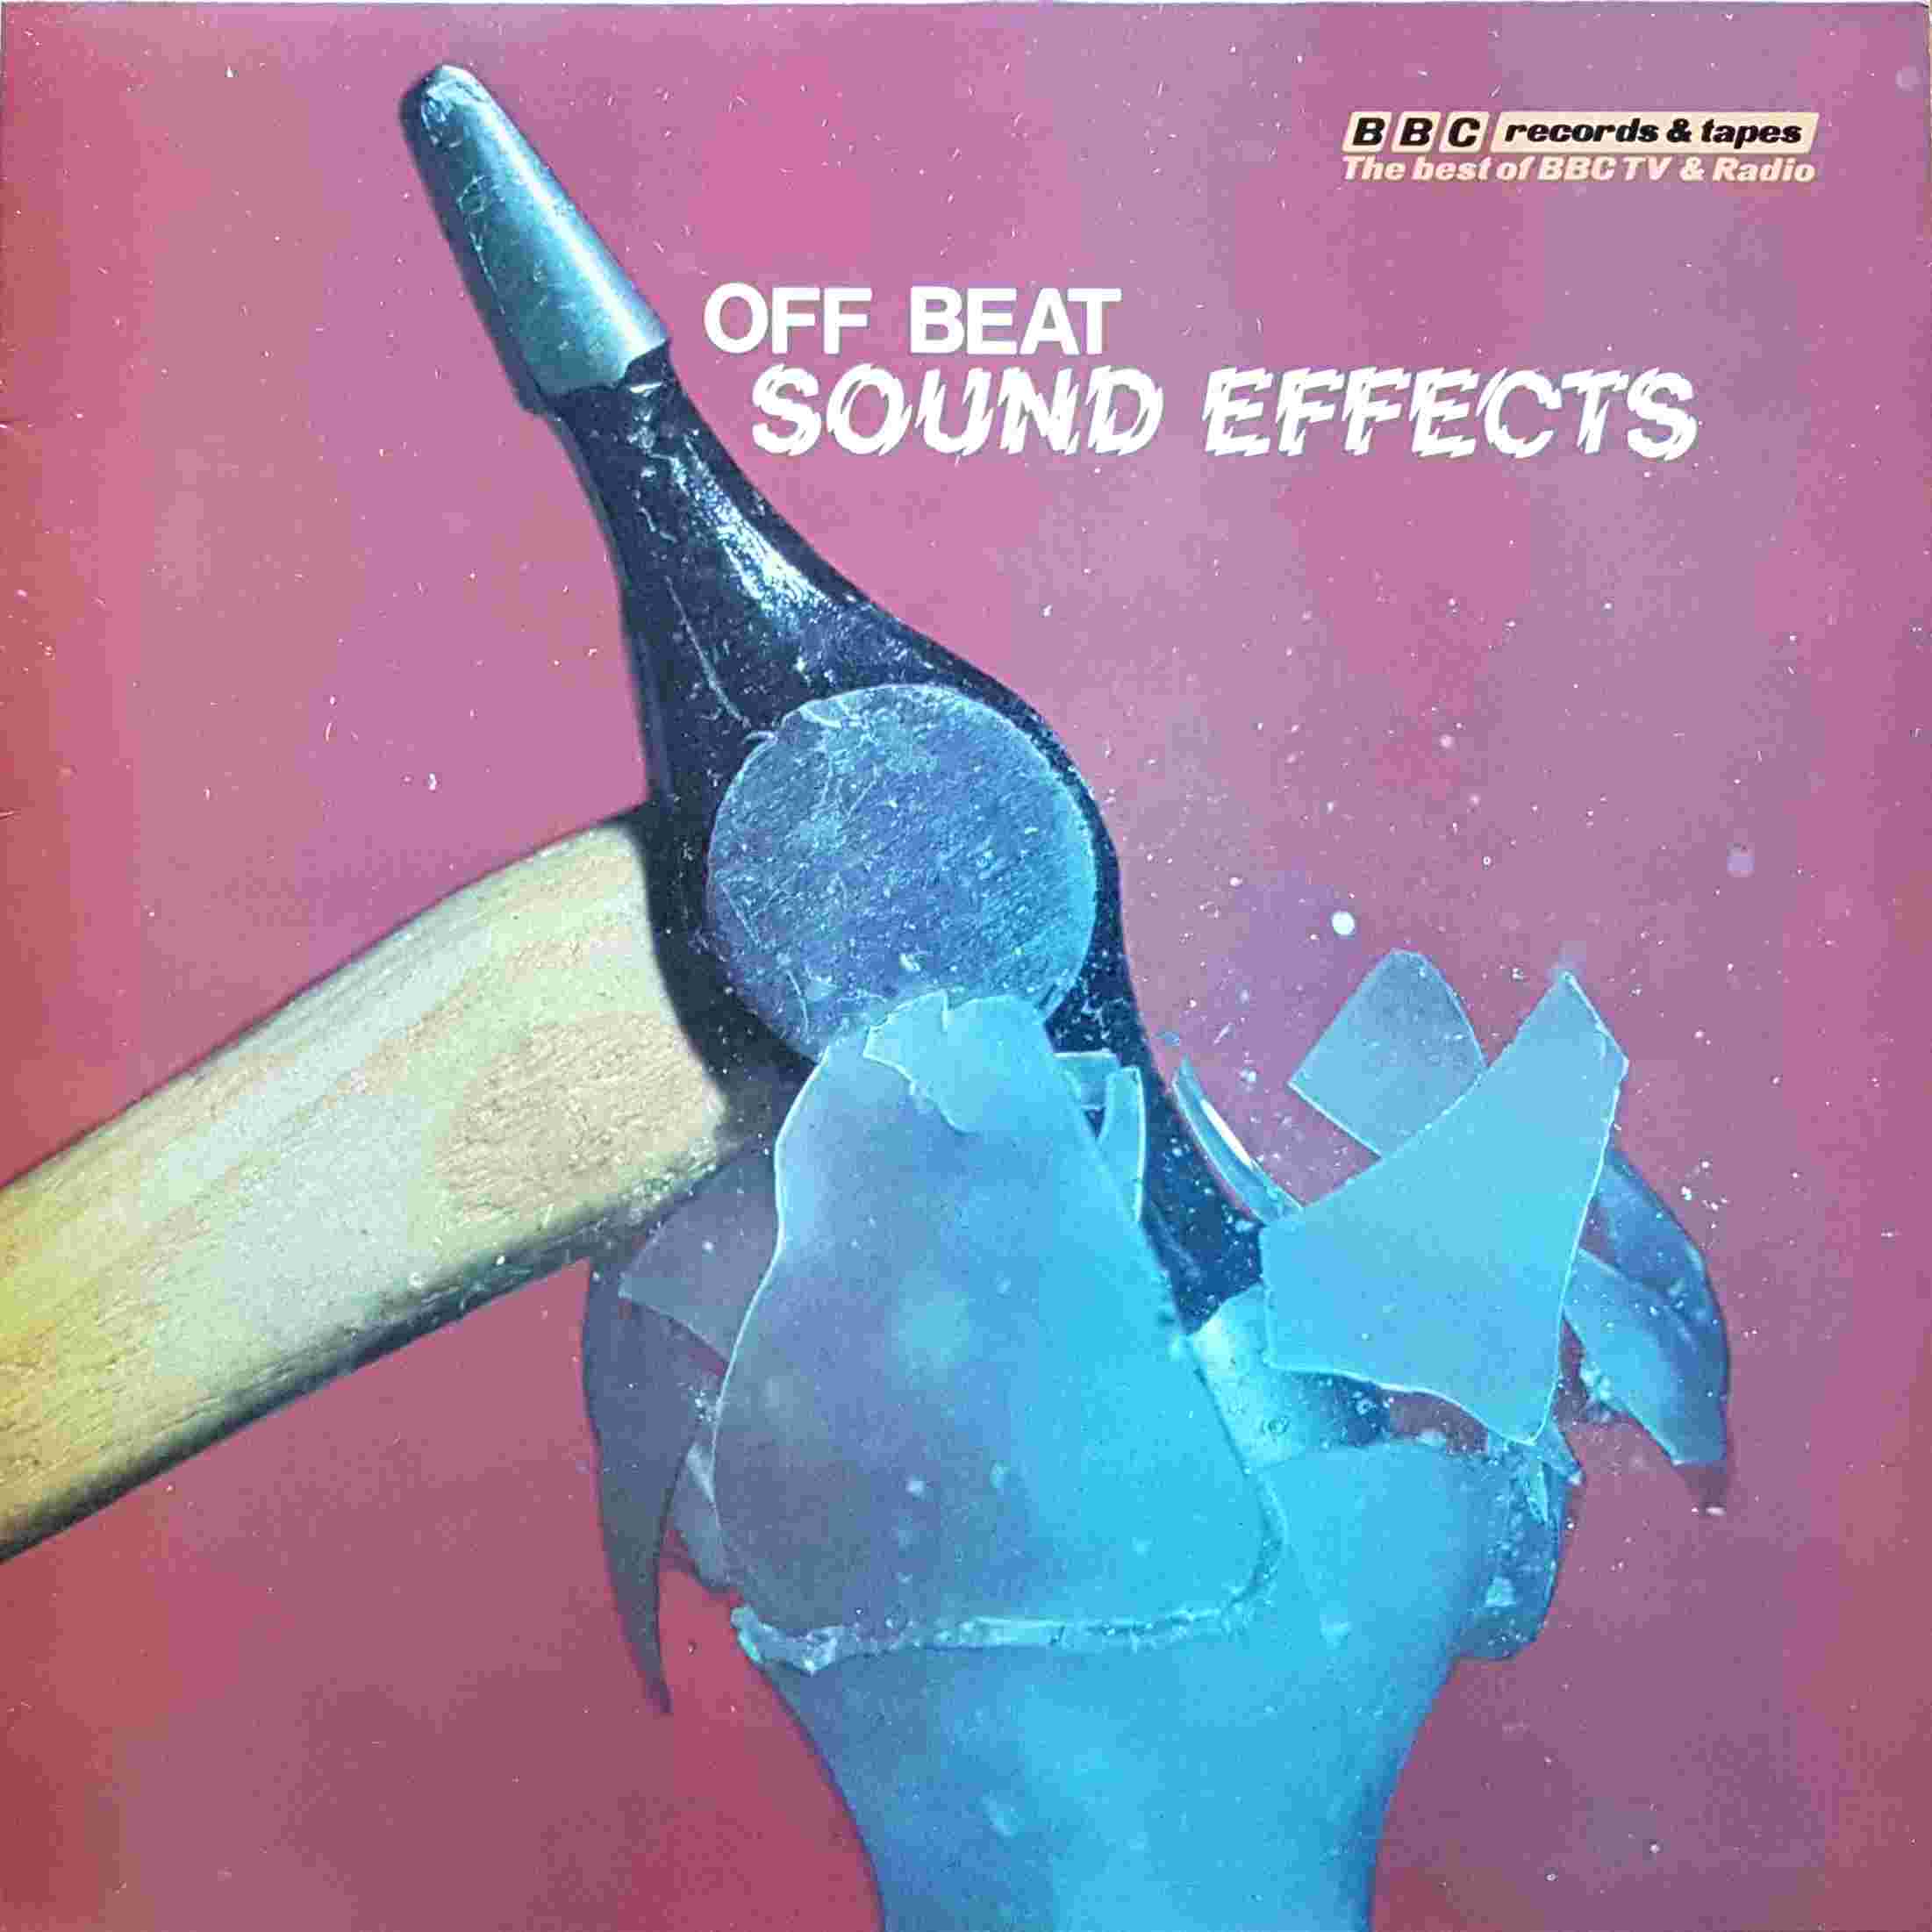 Picture of REC 198 Off beat sound effects - No. 10 by artist Various from the BBC albums - Records and Tapes library